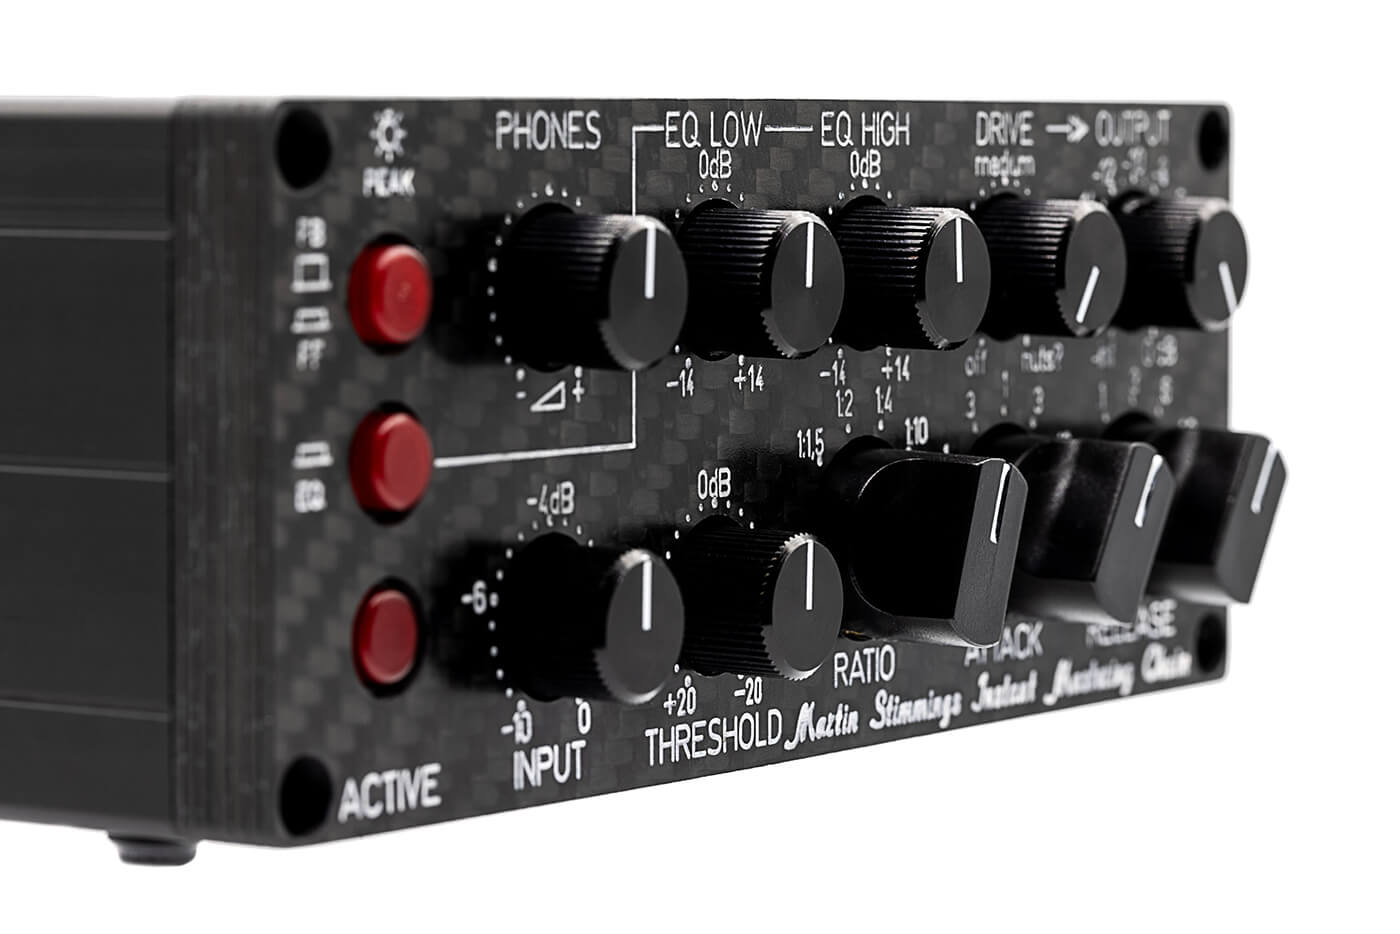 DOCtron Martin Stimming's Instant Mastering Chain